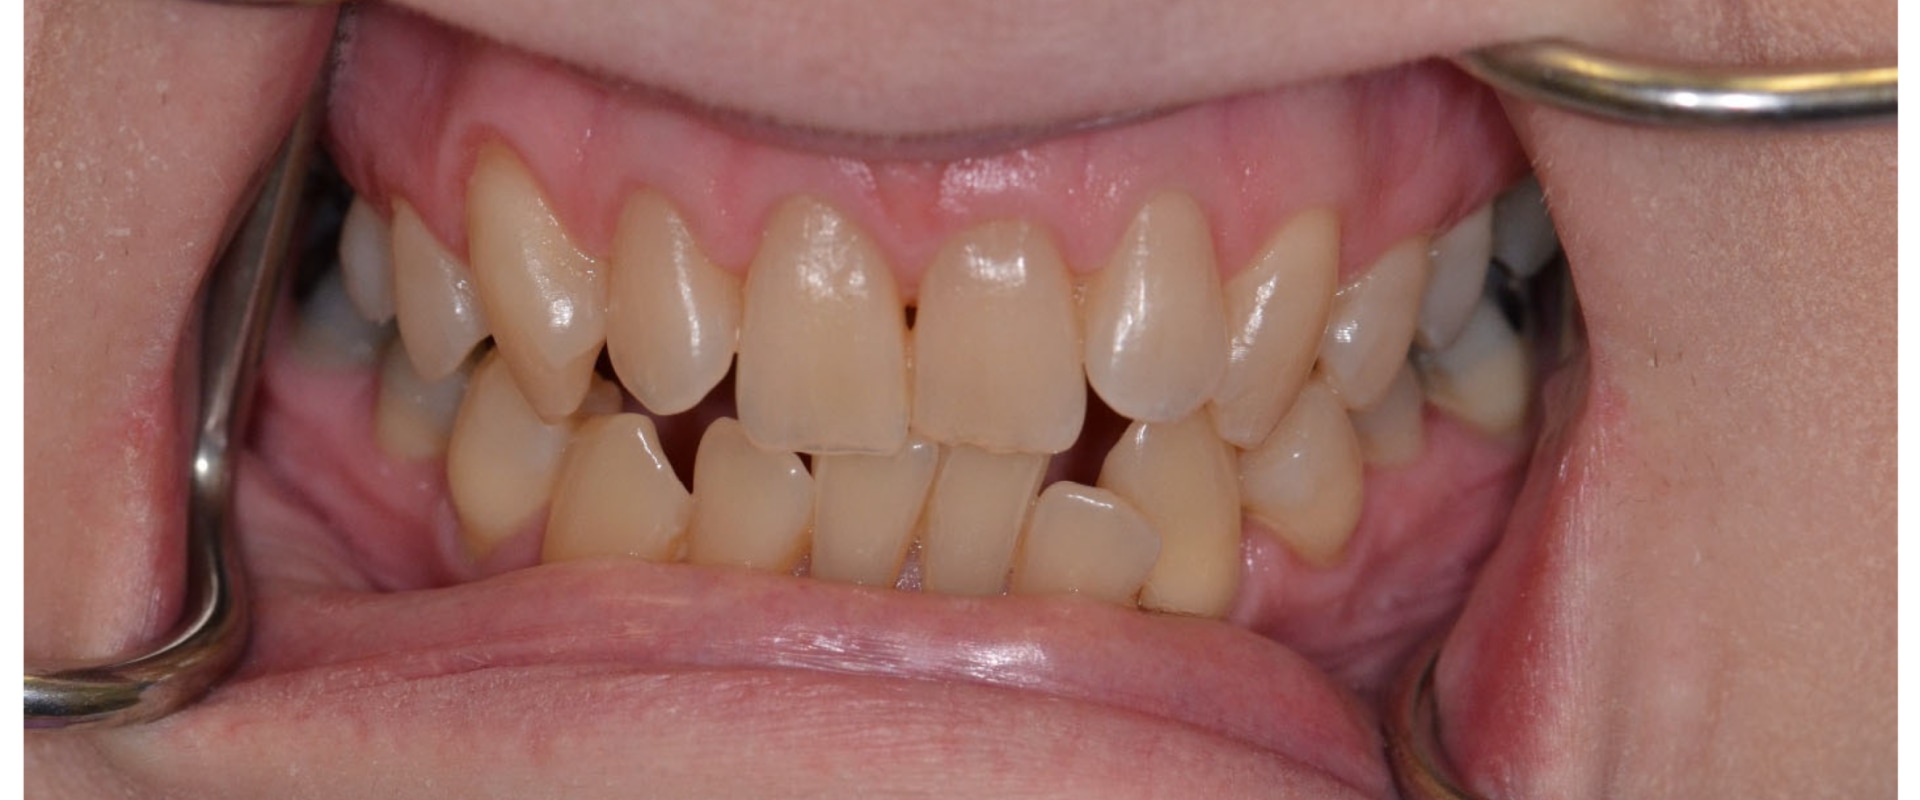 The Importance of Early Diagnosis and Treatment for Preventing Tooth Loss